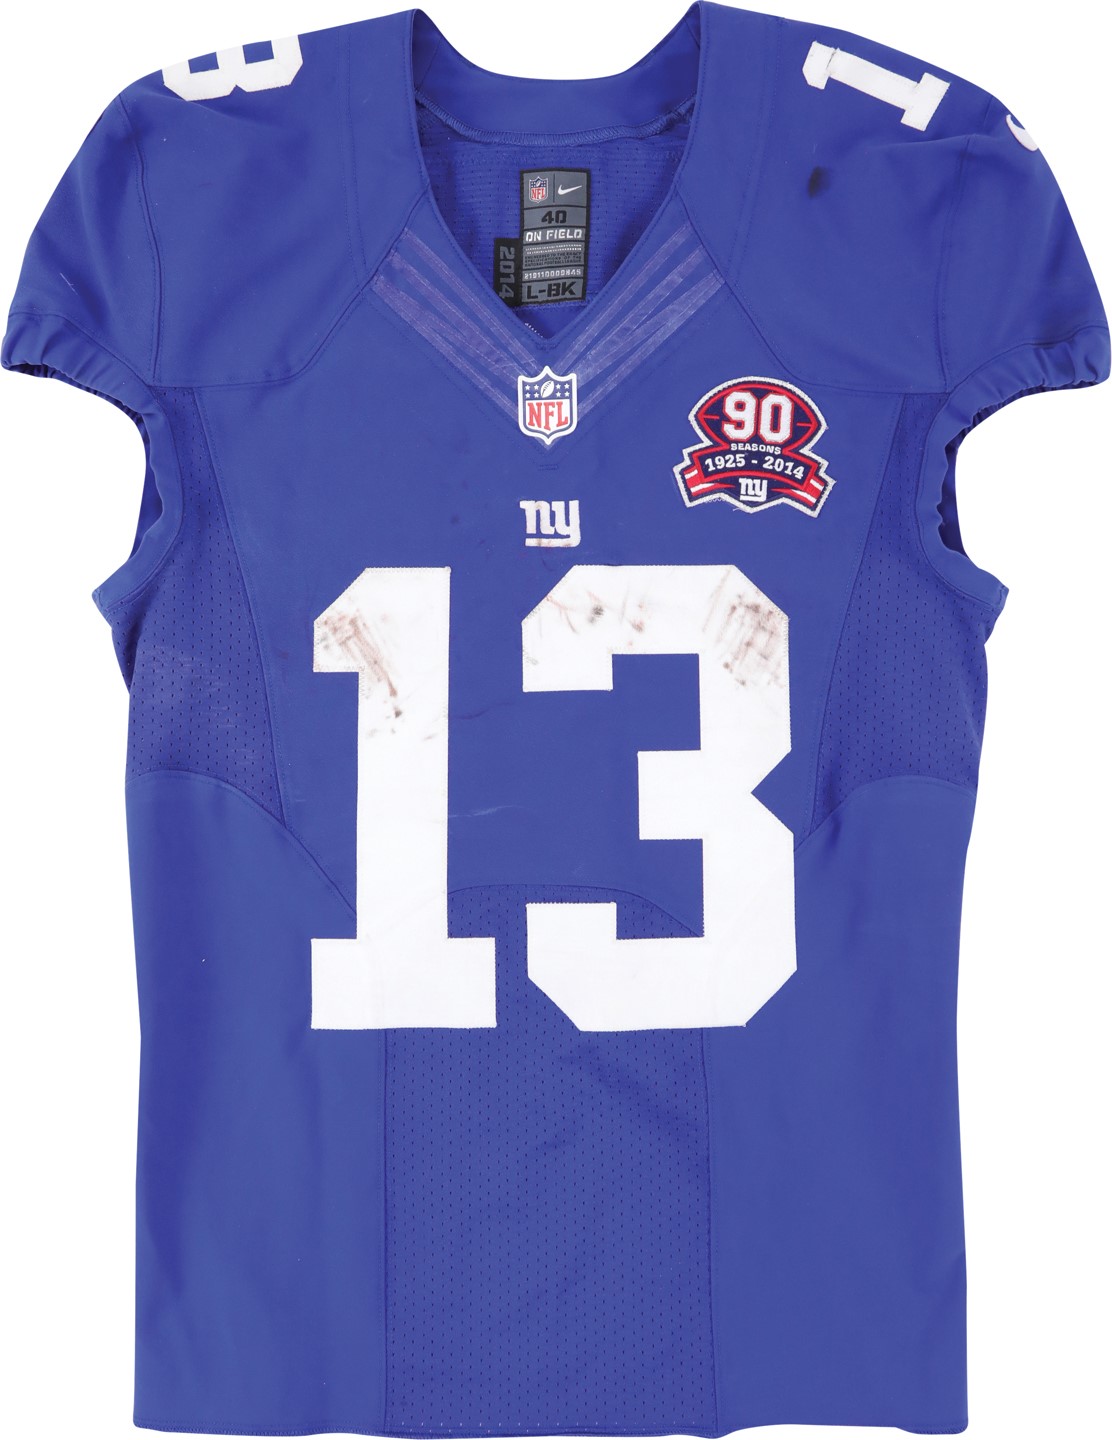 - 12/14/14 Odell Beckham New York Giants Game Worn Rookie Jersey from "Jersey Swap" with DeSean Jackson - First Career 3 TD Game! (Photo-Matched & MeiGray LOA)